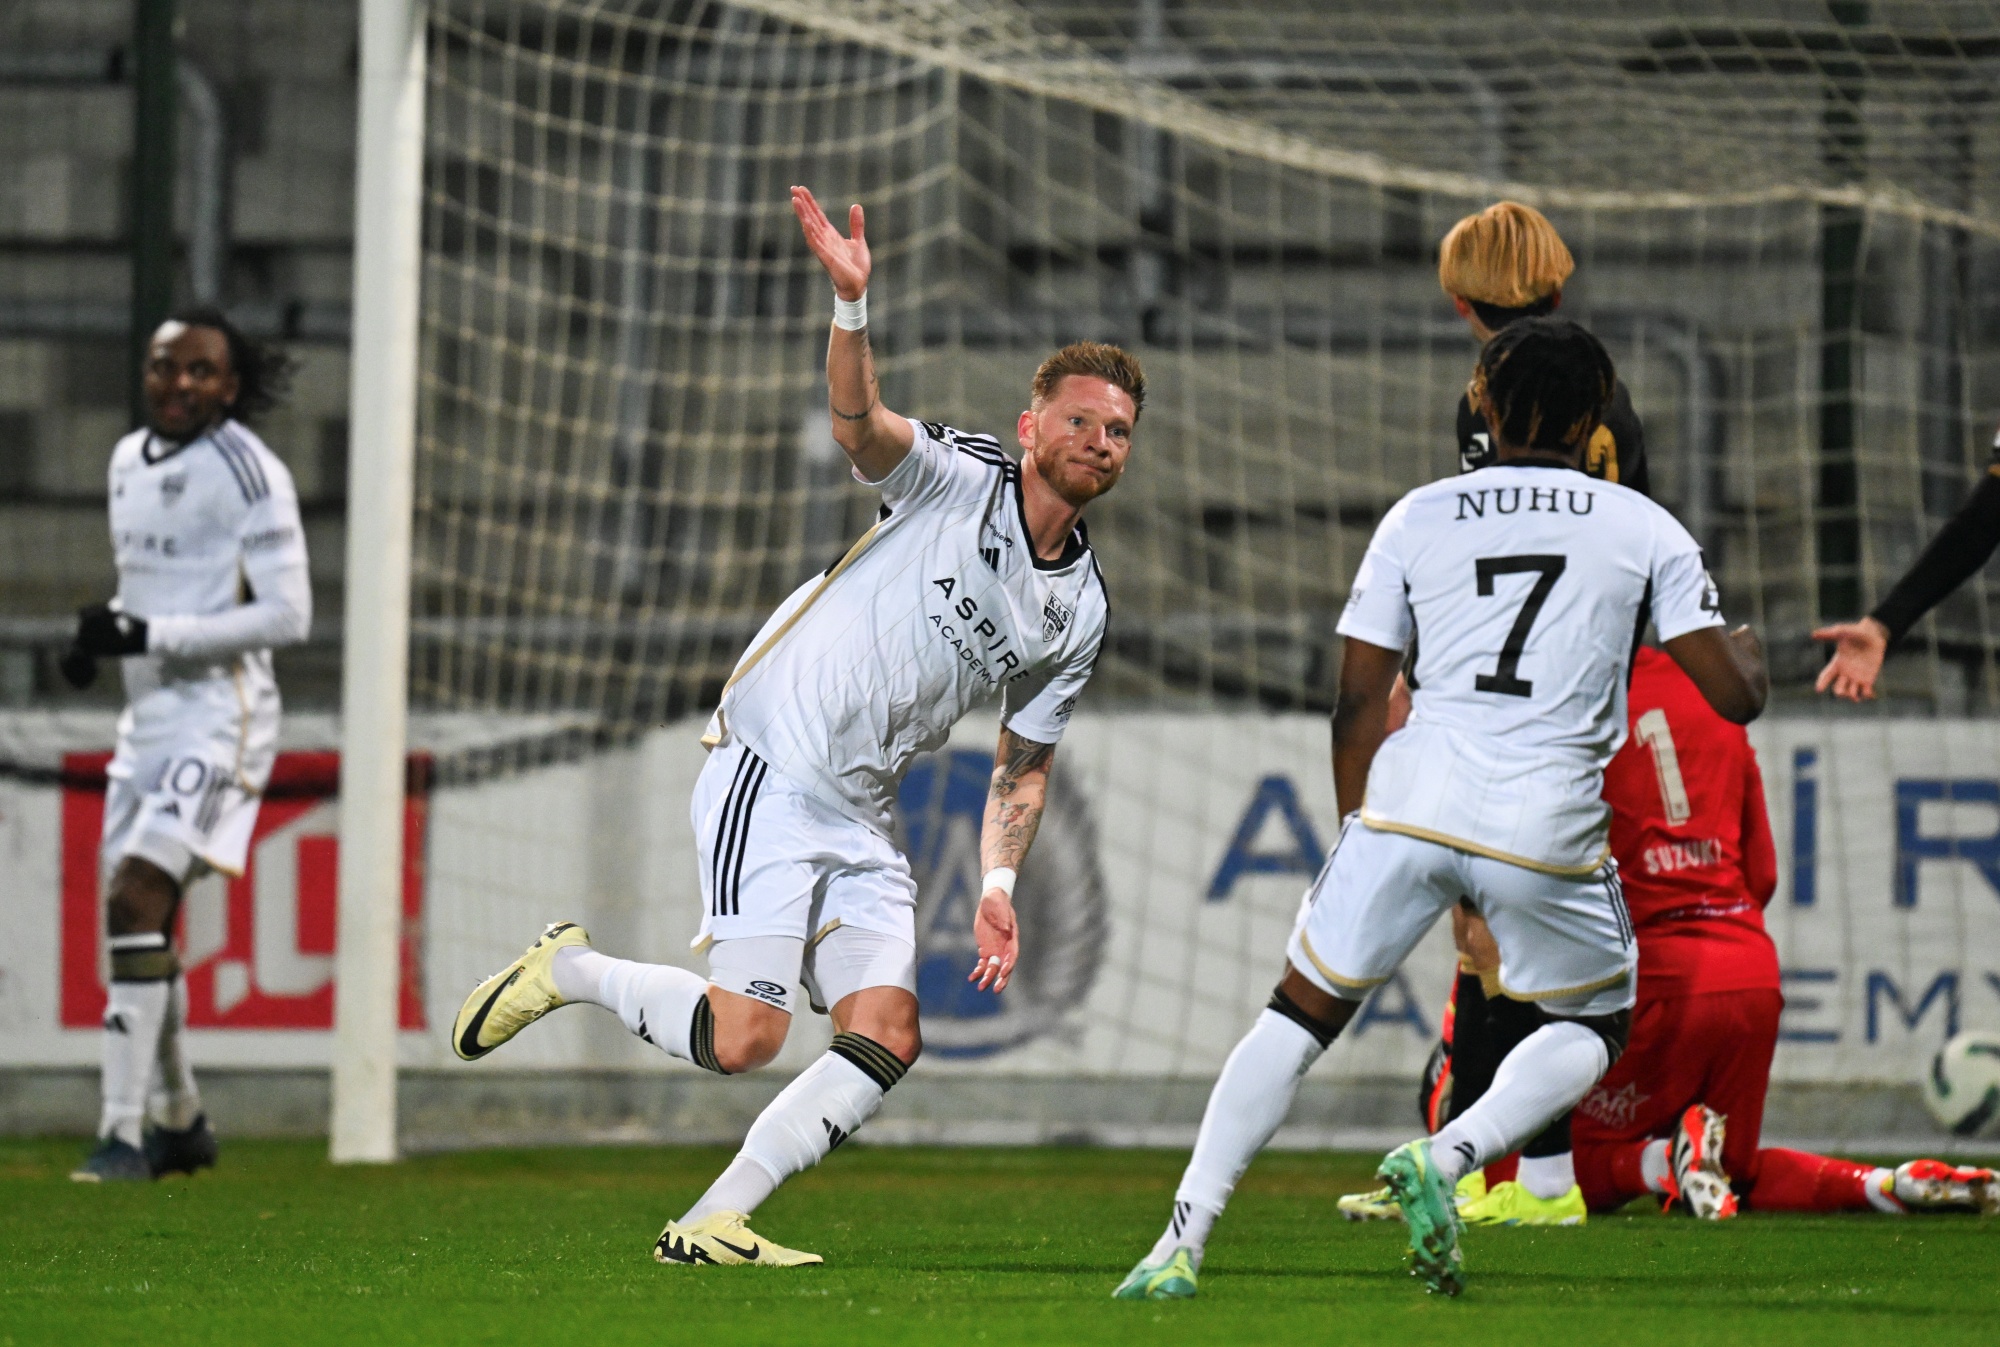 Eupen's Renaud Emond celebrates after scoring during a soccer match between KAS Eupen and Sint-Truidense VV, Sunday 10 March 2024 in Eupen, on day 29 of the 2023-2024 'Jupiler Pro League' first division of the Belgian championship. BELGA PHOTO JOHN THYS